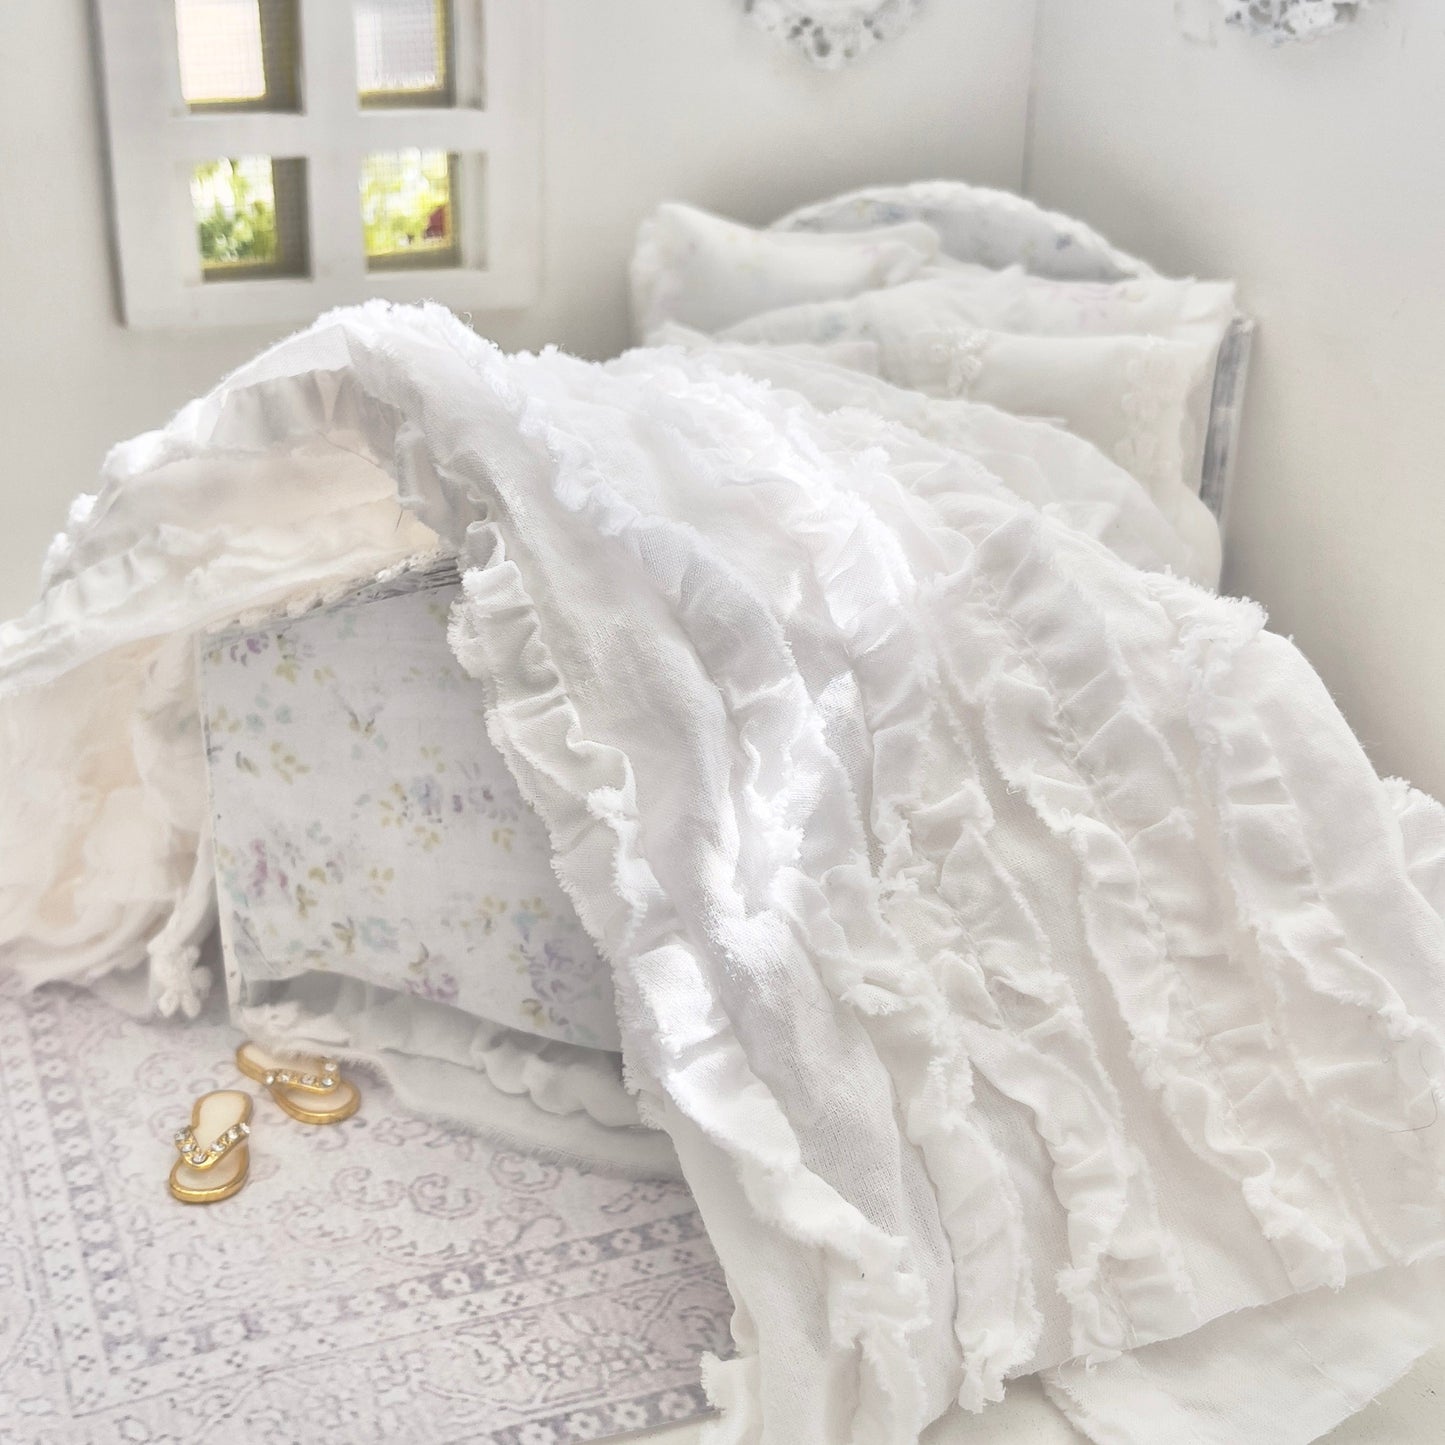 Chantallena Doll House Dressed 1:12 Scale Bed | White Decoupage Bed with White Cotton Bedding Set | Tess